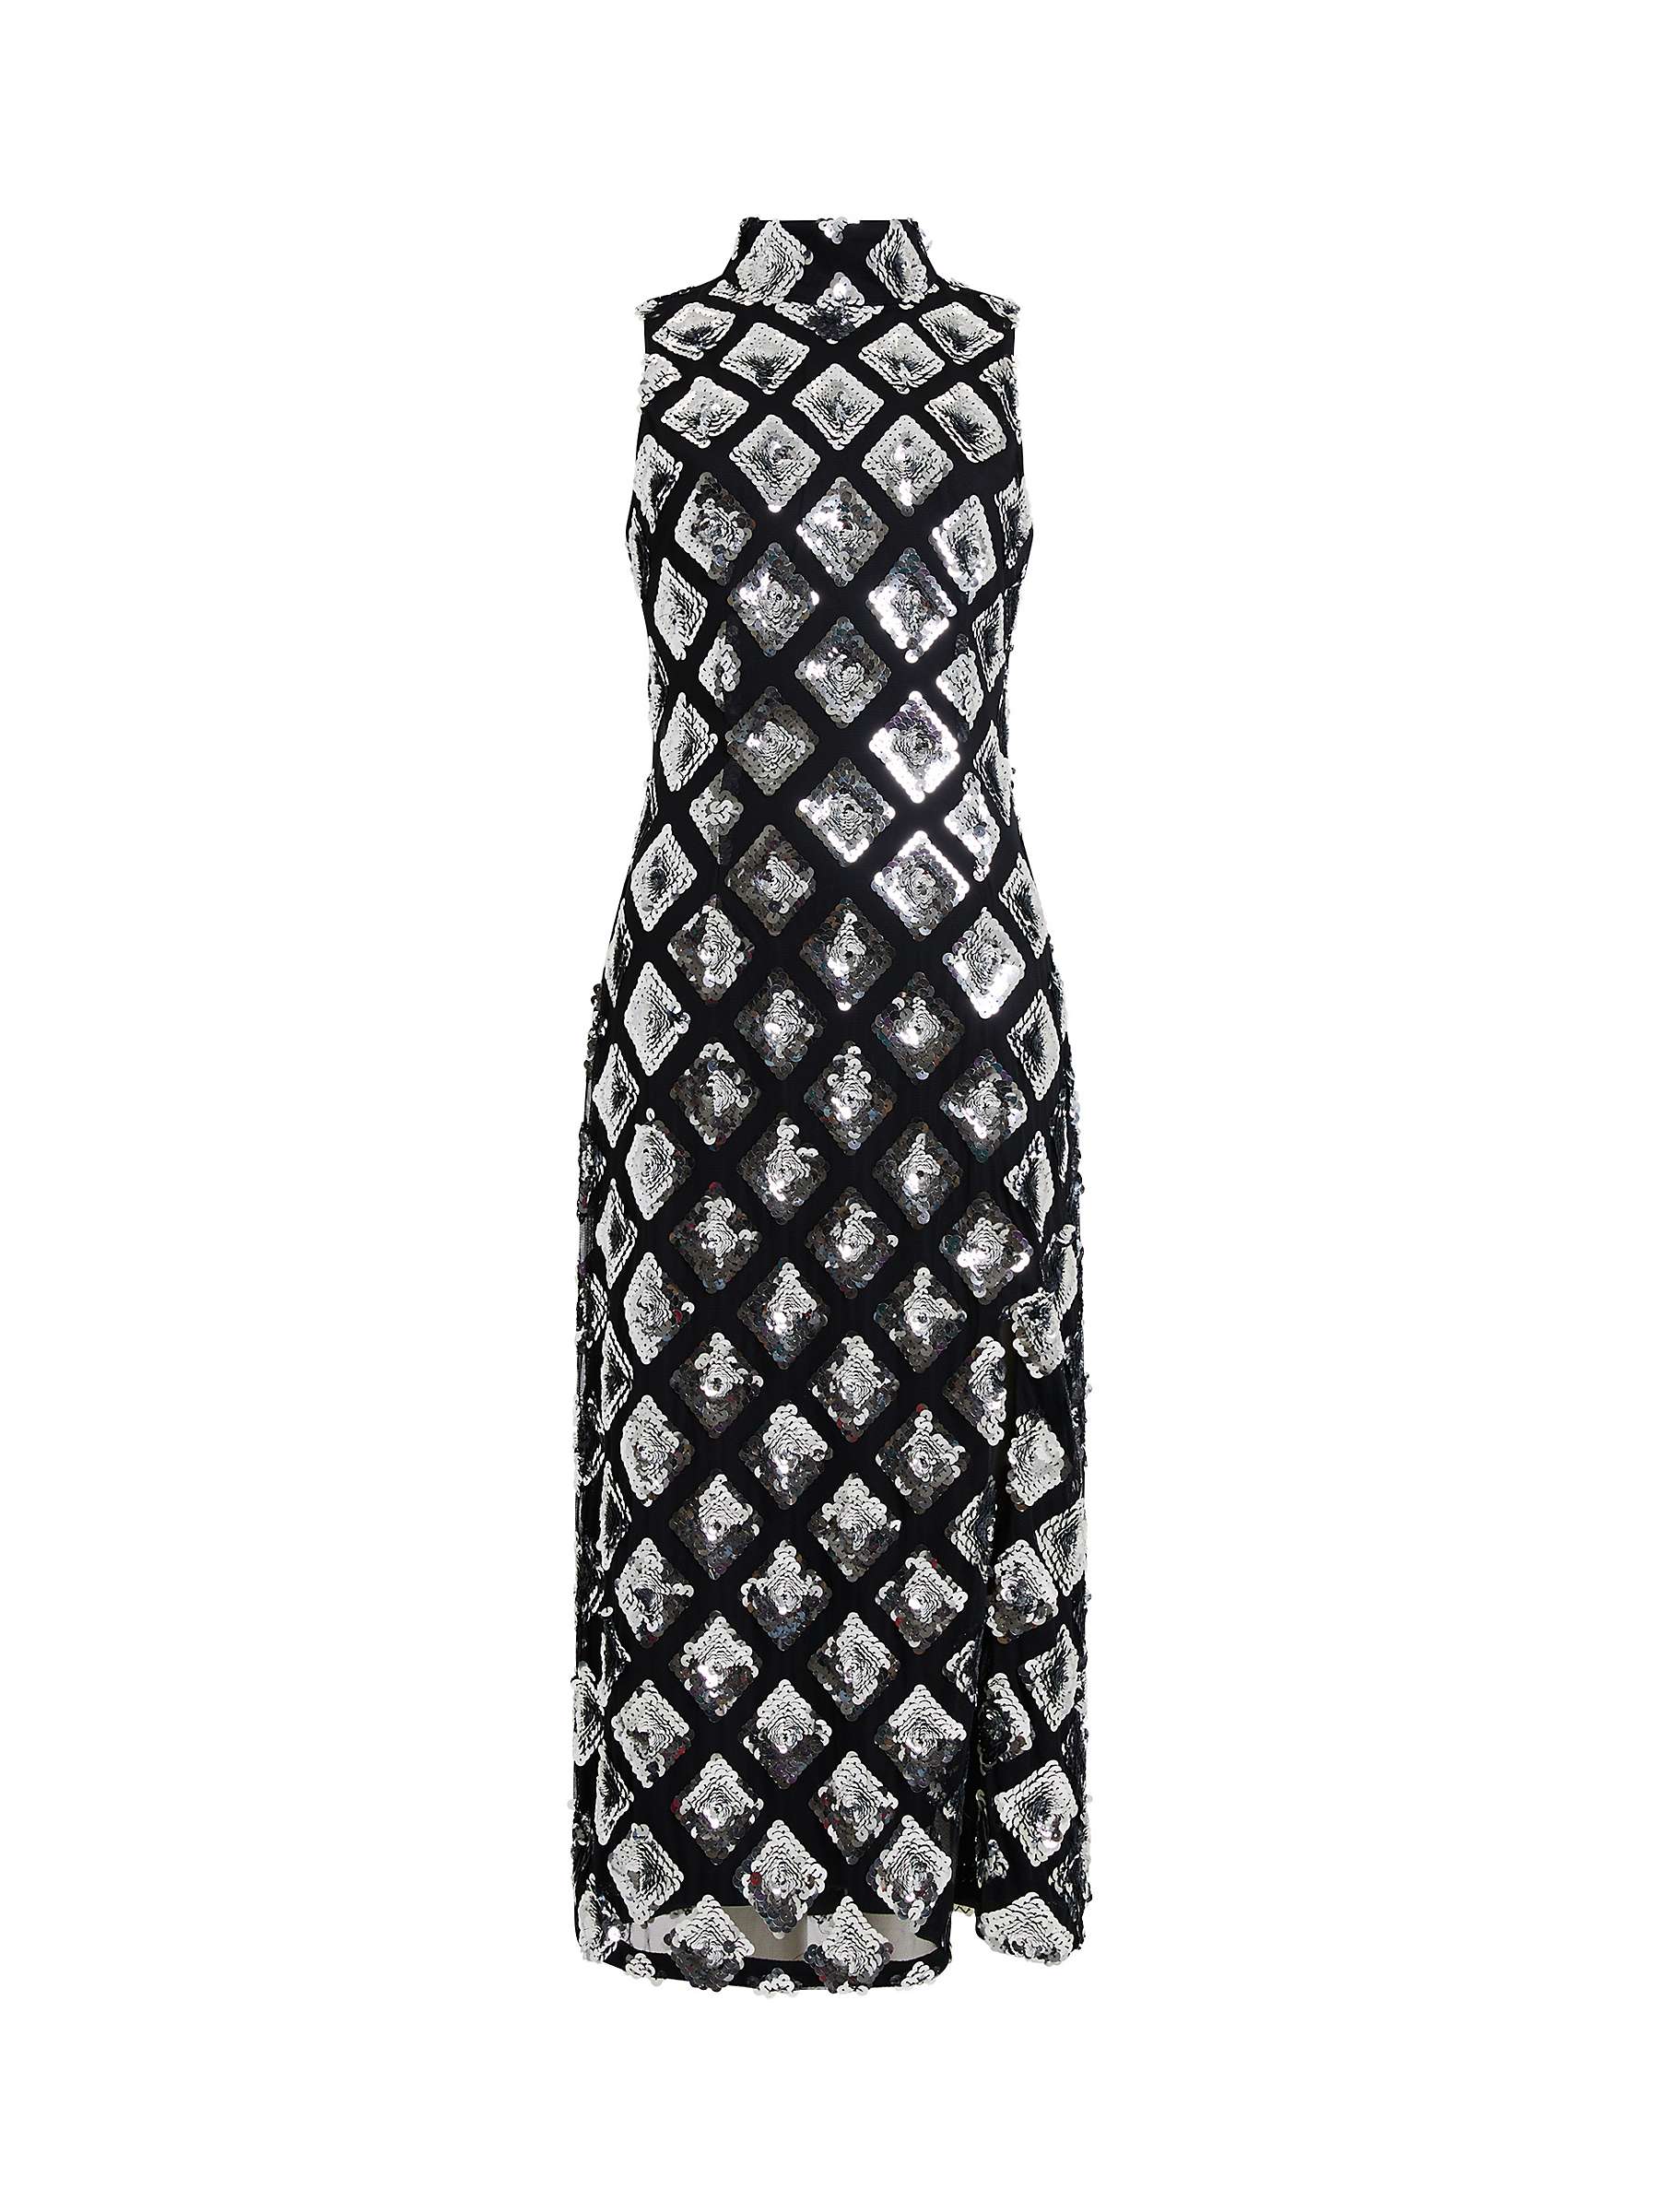 Buy French Connection Axel Embellished Dress, Black/Silver Online at johnlewis.com